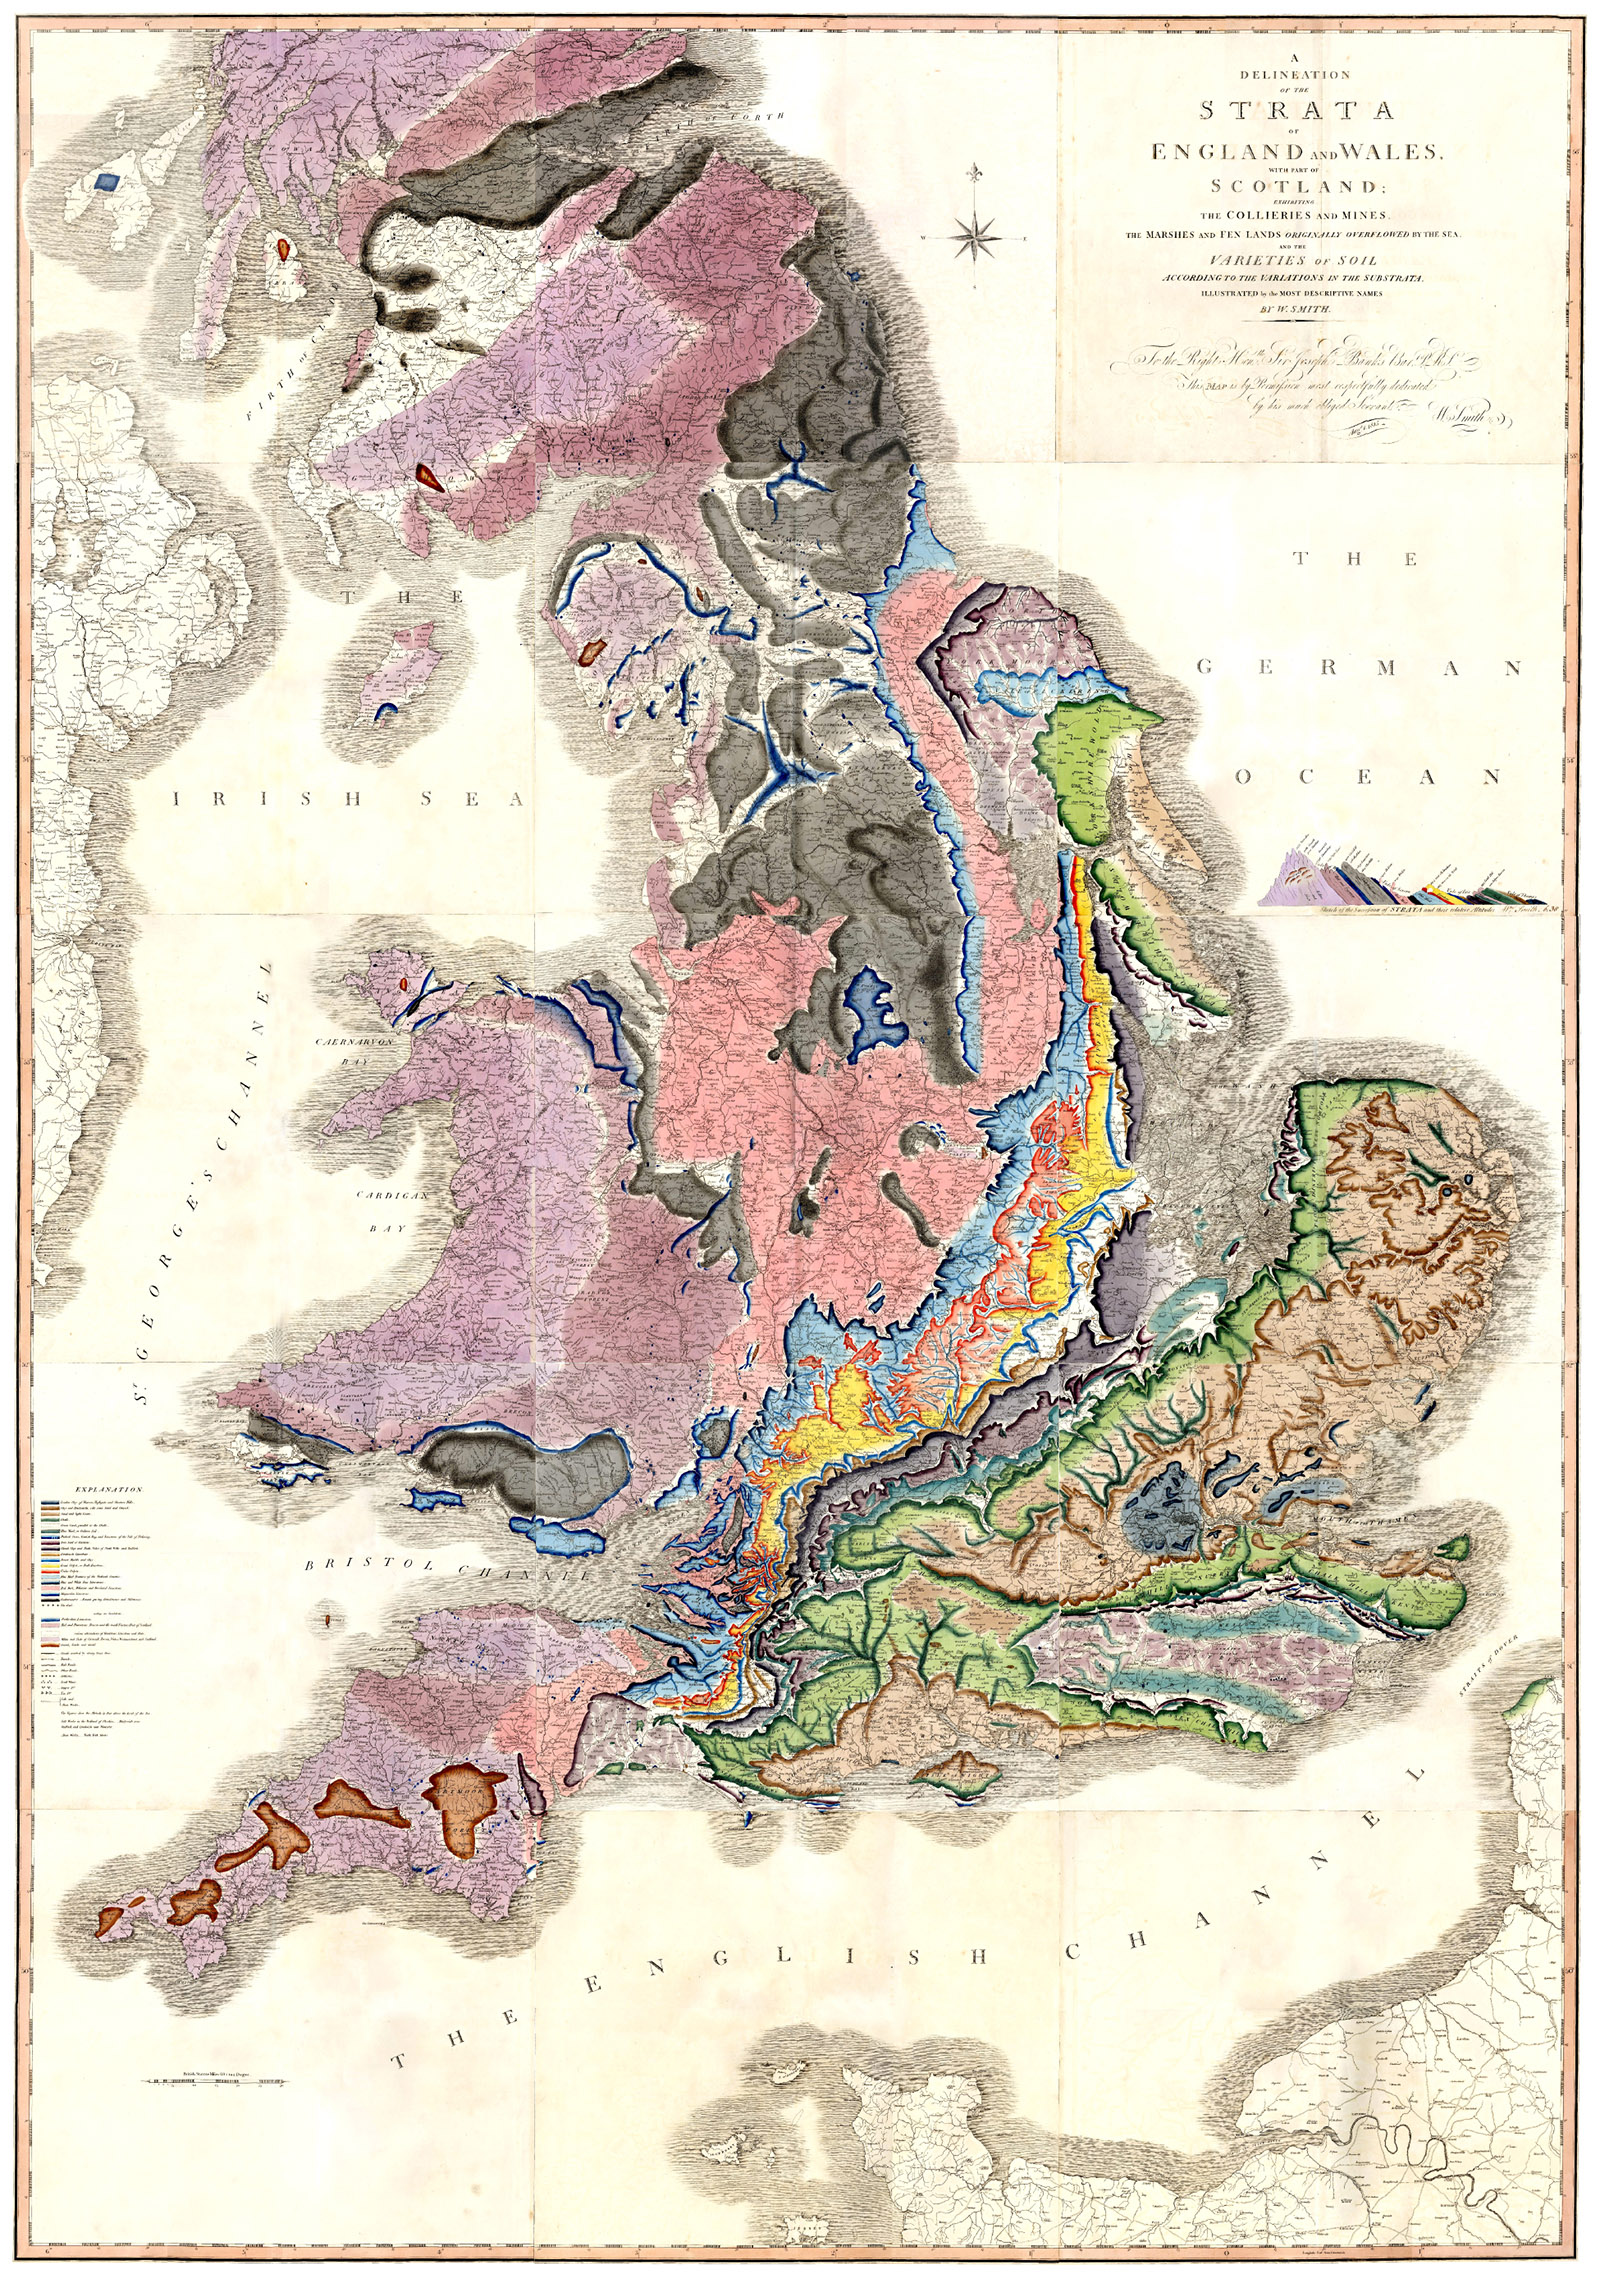 A Delineation of the Strata of England and Wales, with part of Scotland by William Smith